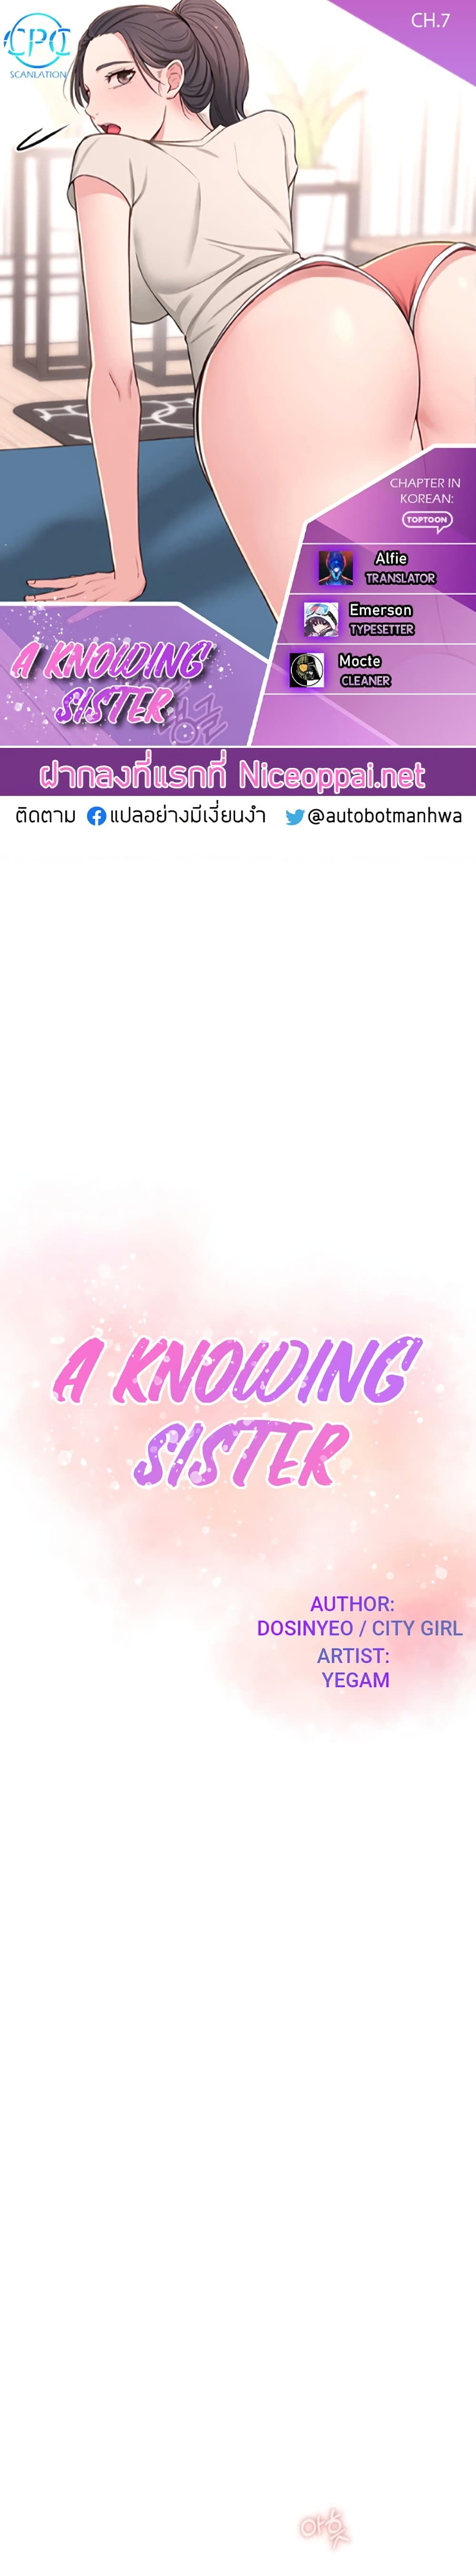 A Knowing Sister 7 (1)